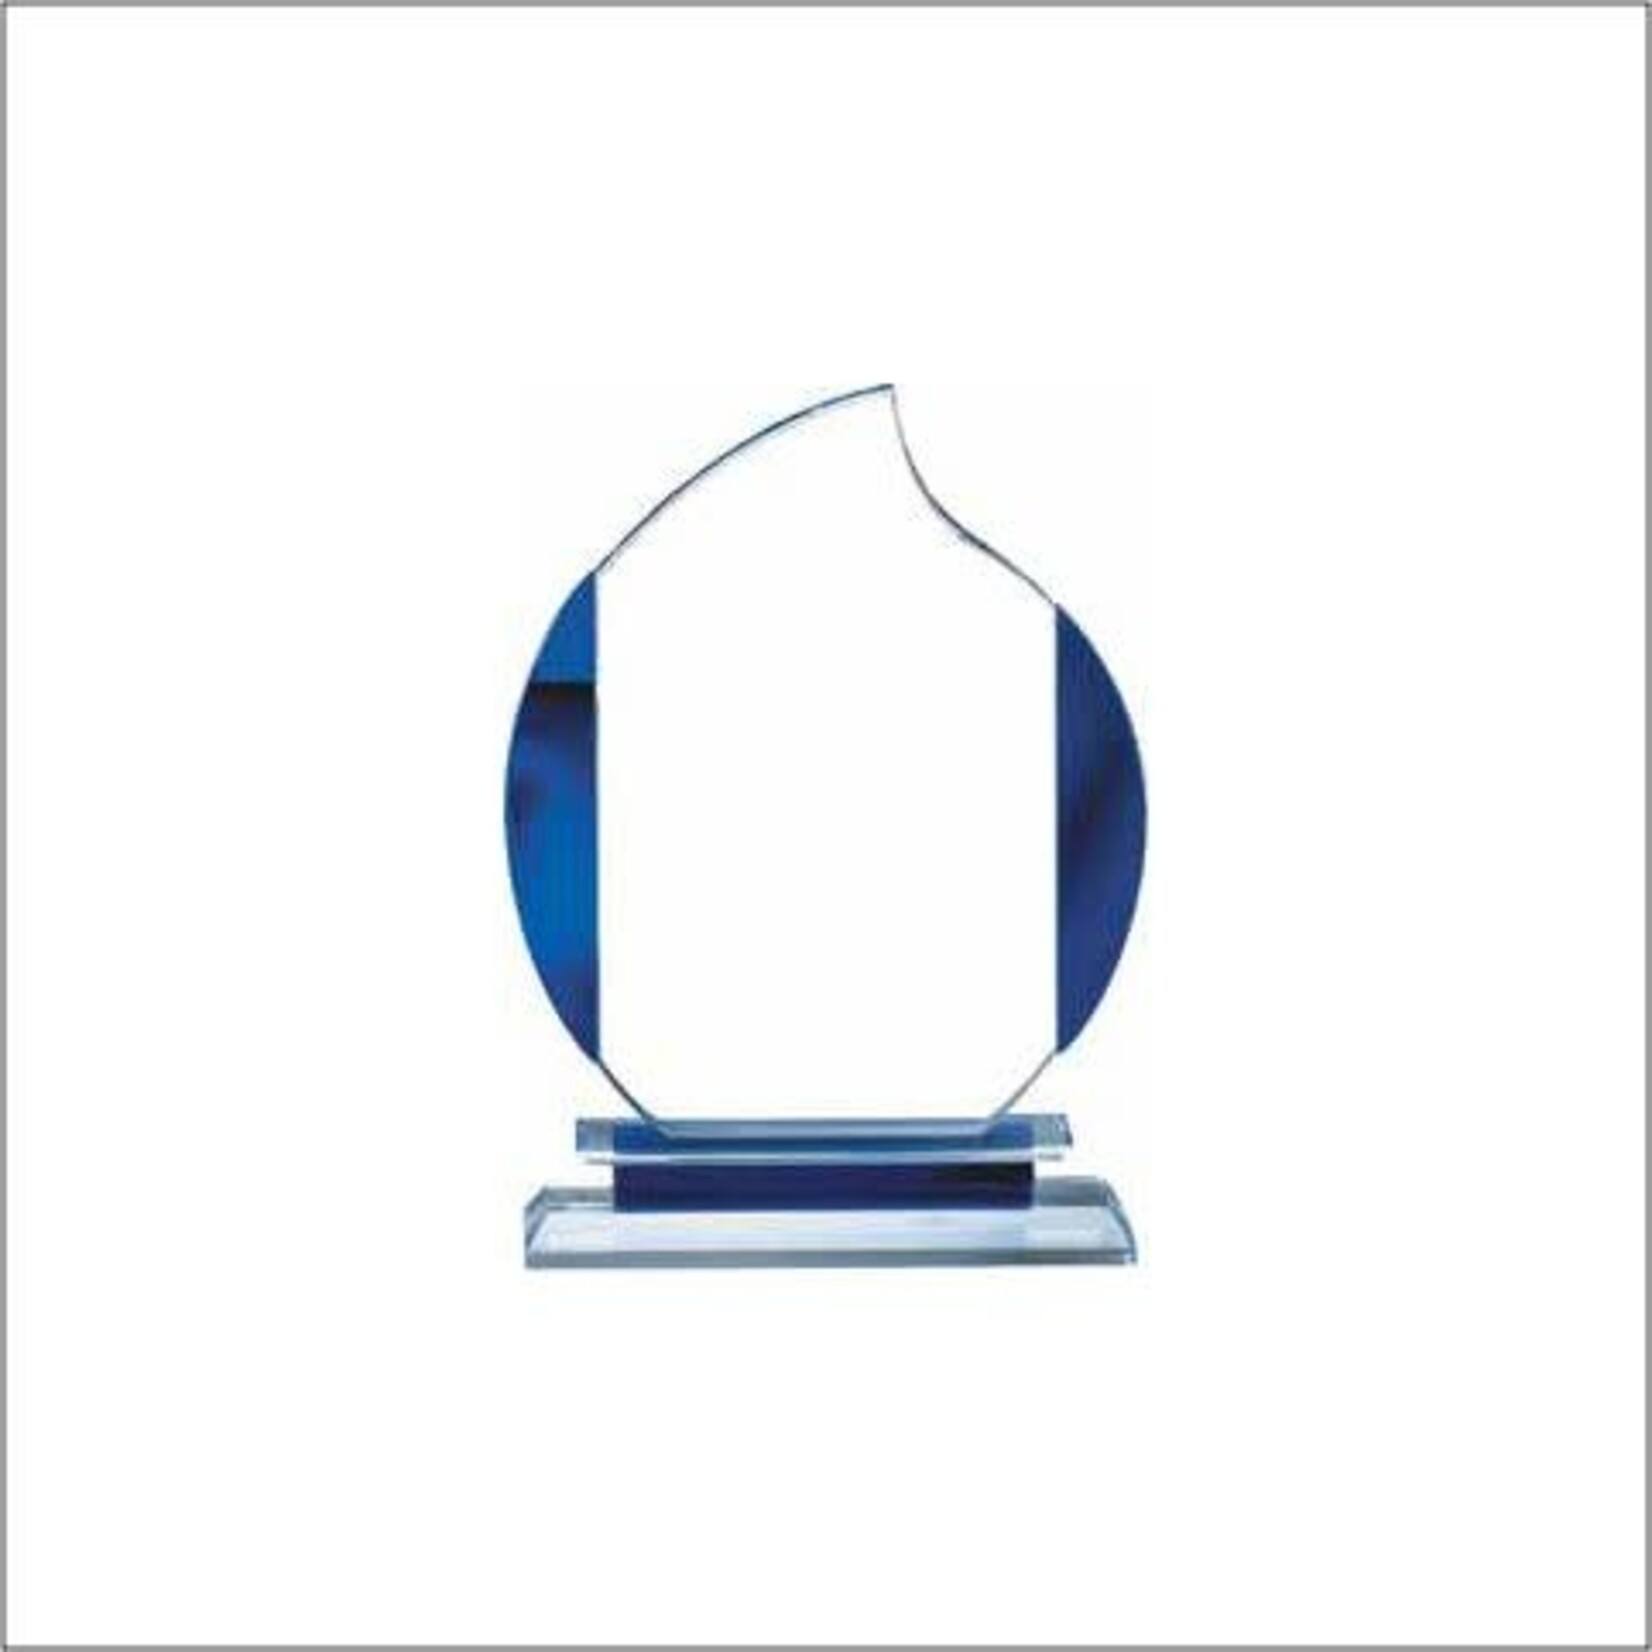 Marco GL105 Glass Award includes engraving